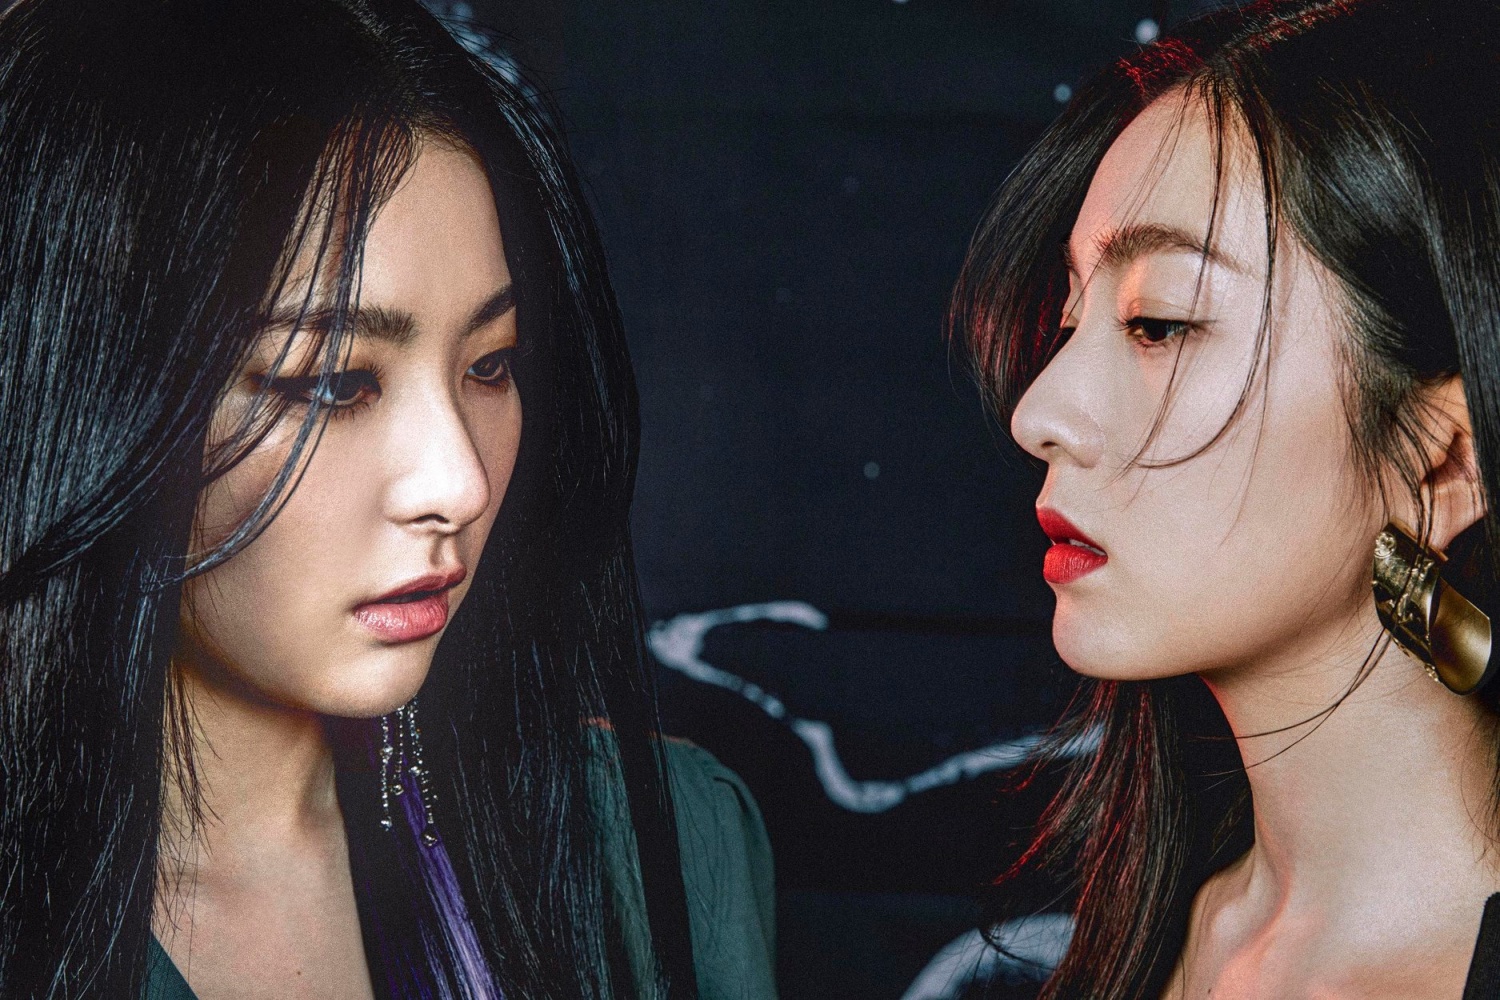 Red Velvet Irene & Seulgi to Perform on "TIME 100 Talks" + Check Out The Exclusive Details